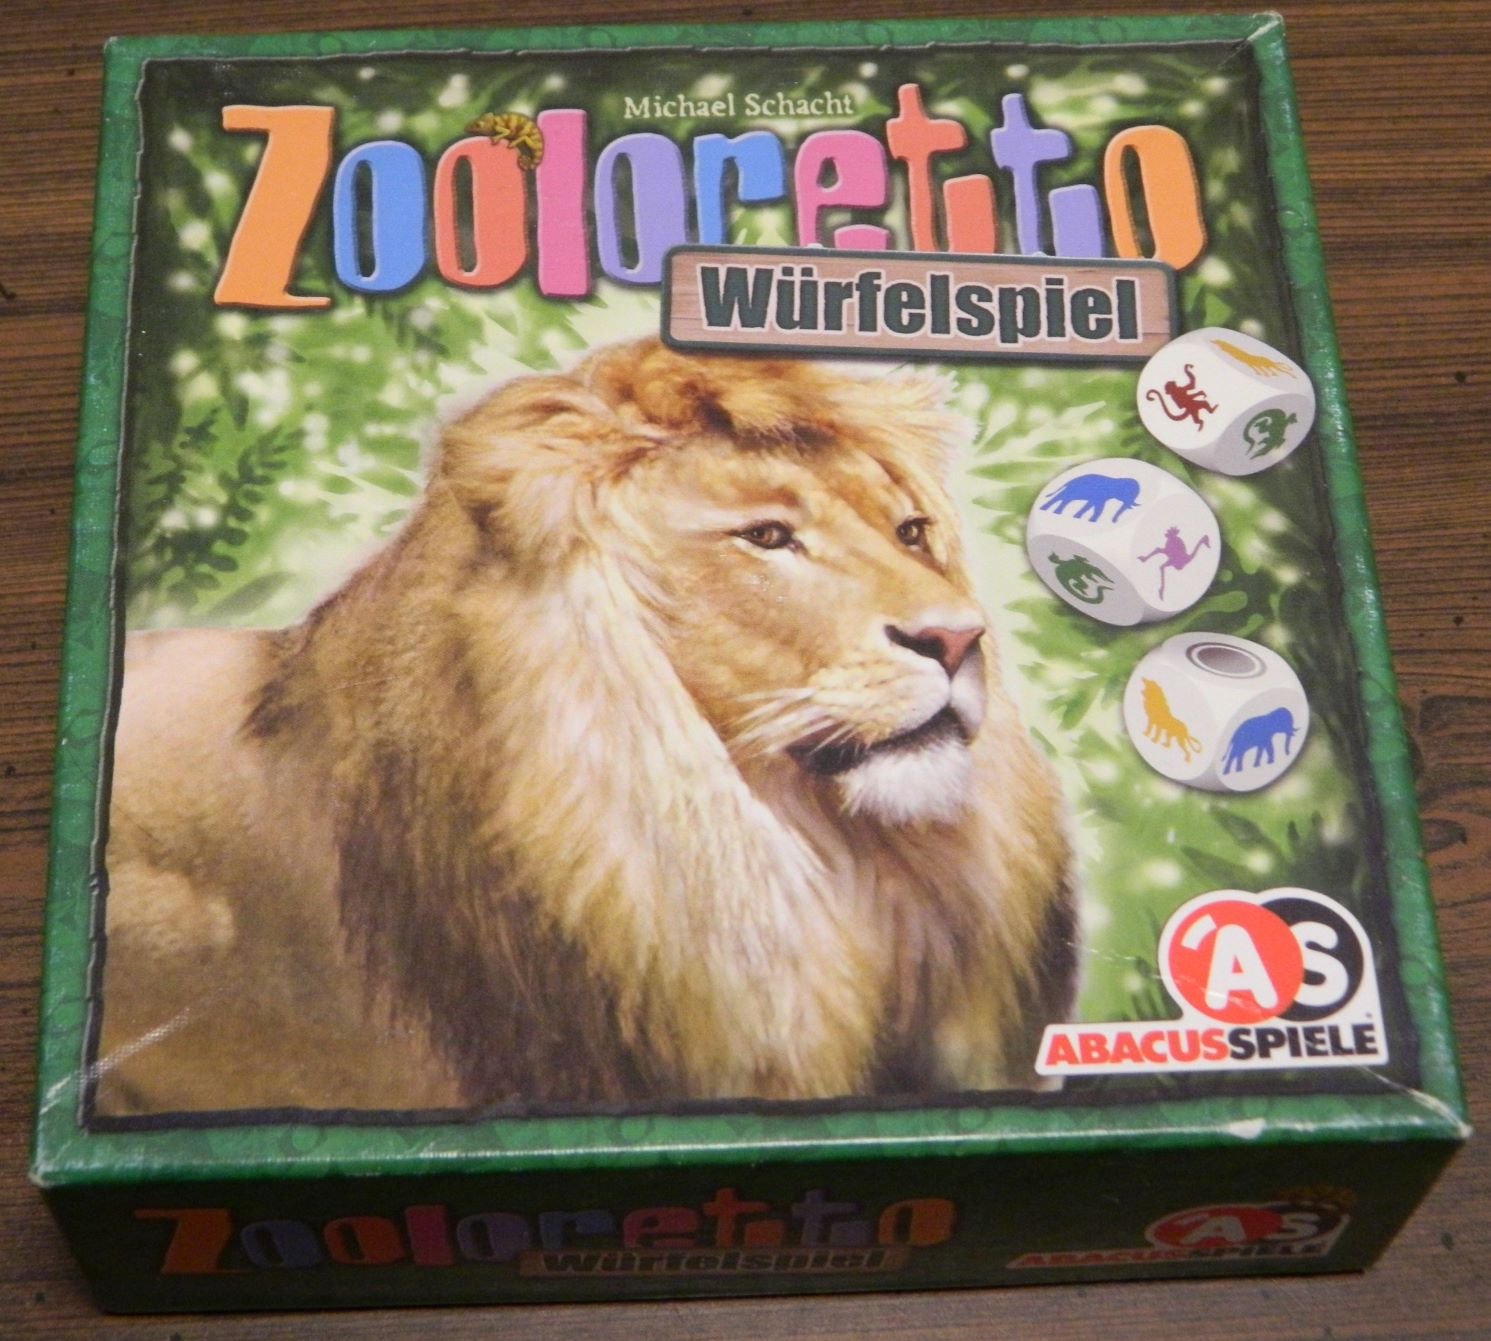 Zooloretto: The Dice Game Review and Rules - Geeky Hobbies